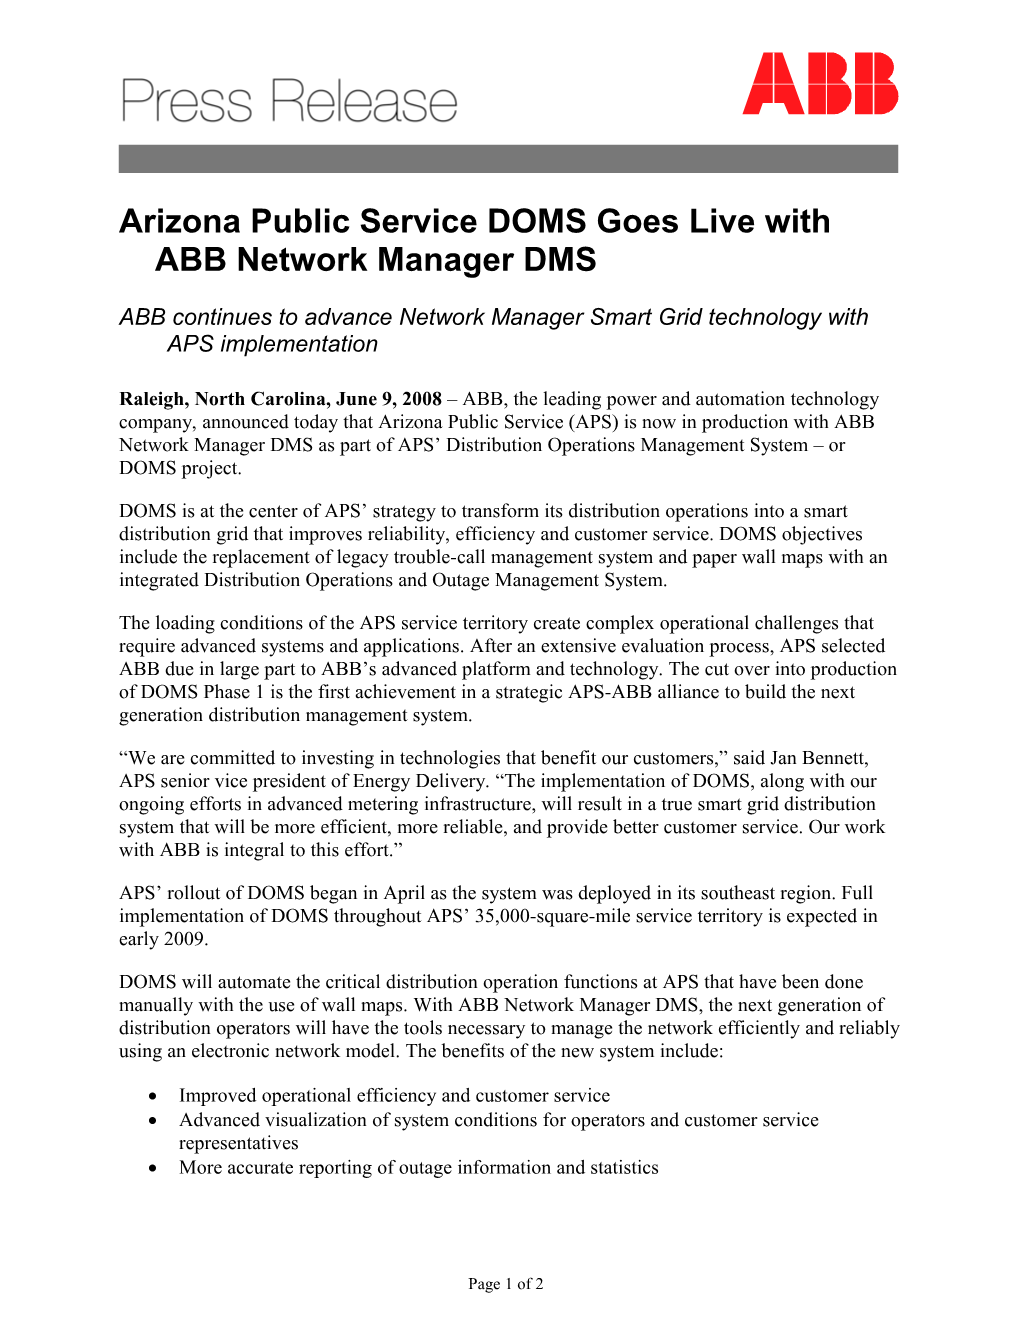 Arizona Public Service DOMS Goes Live with ABB Network Manager DMS